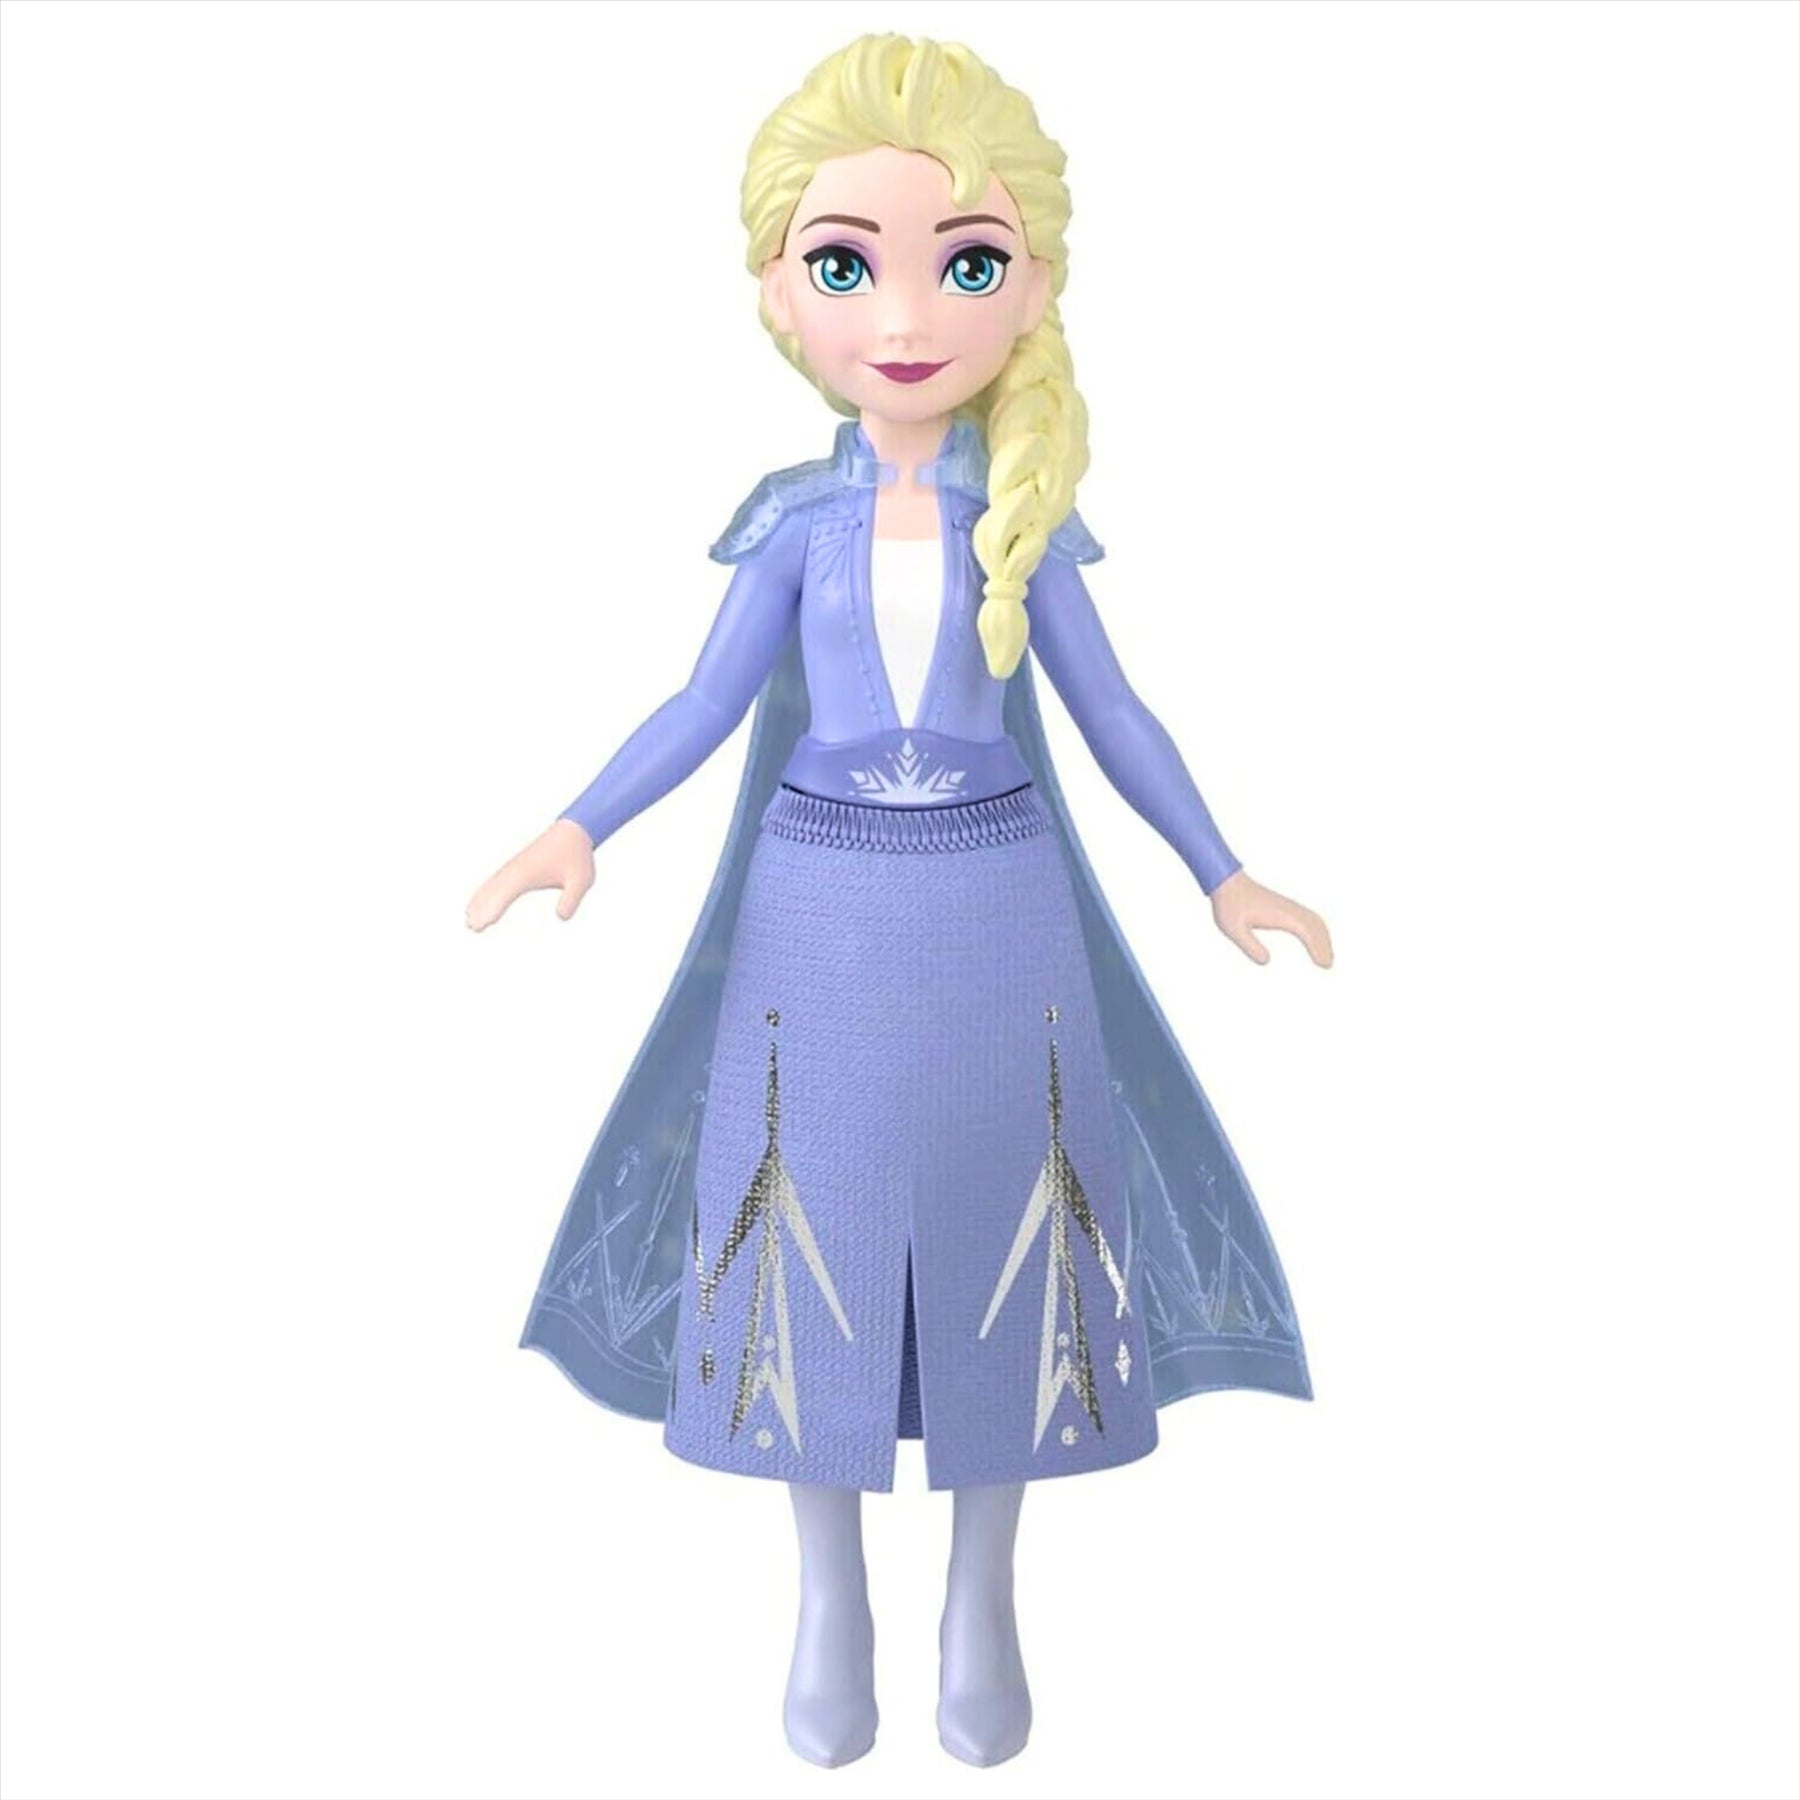 Disney Frozen Elsa and Anna 10cm Articulated Action Figure Play Toys - Twin Pack - Toptoys2u